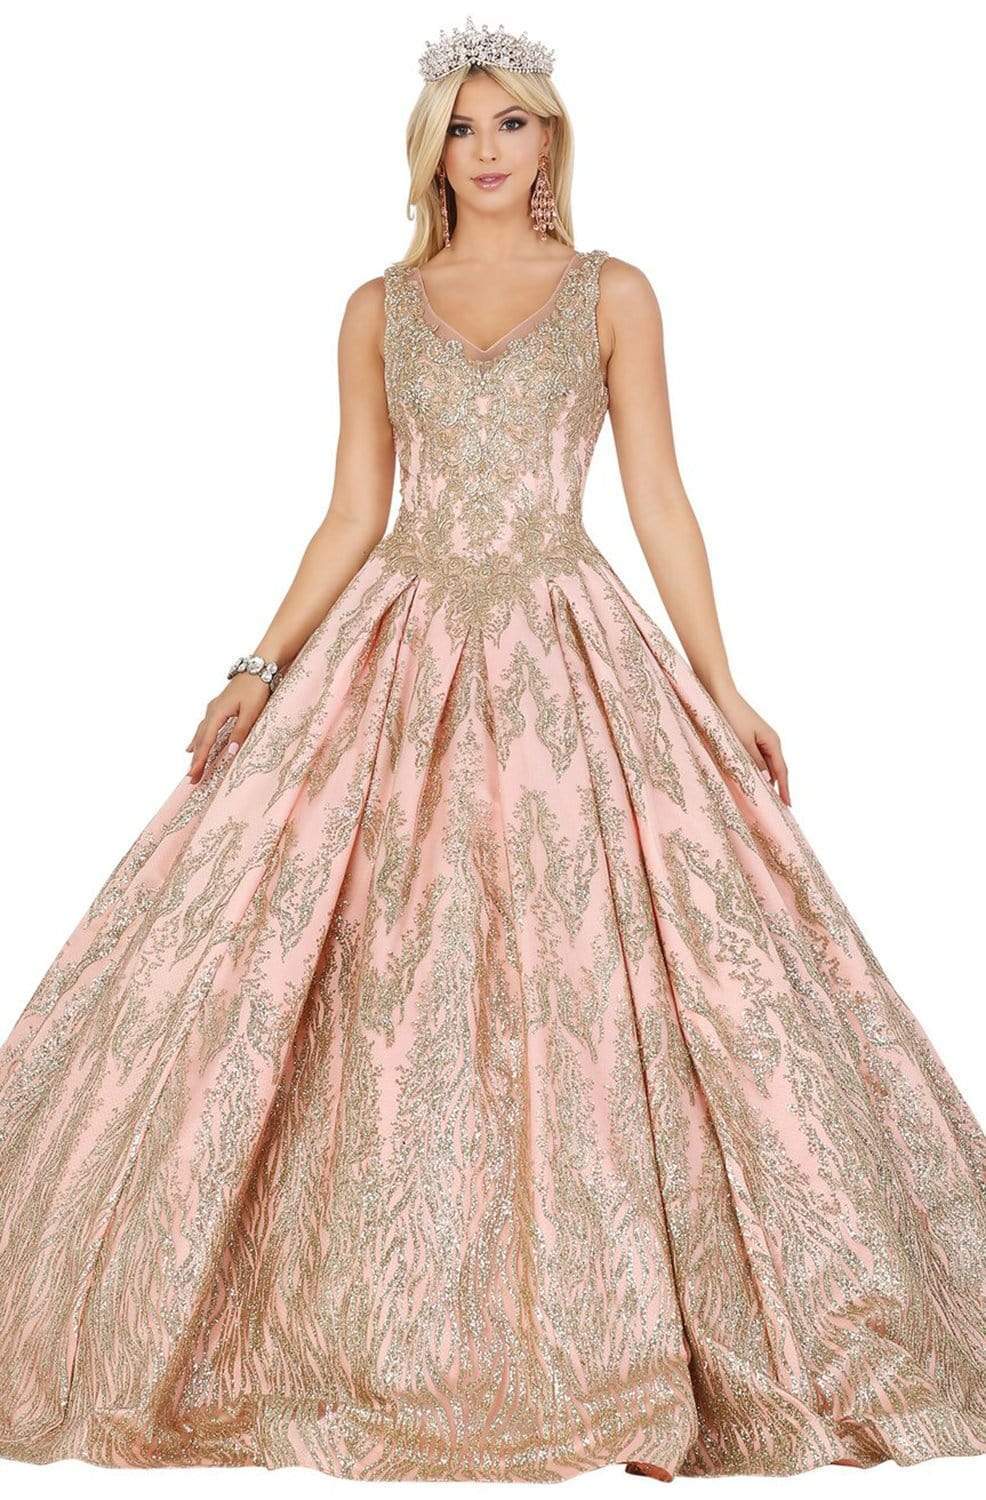 Dancing Queen - 1508 Embellished V-neck Pleated Ballgown
